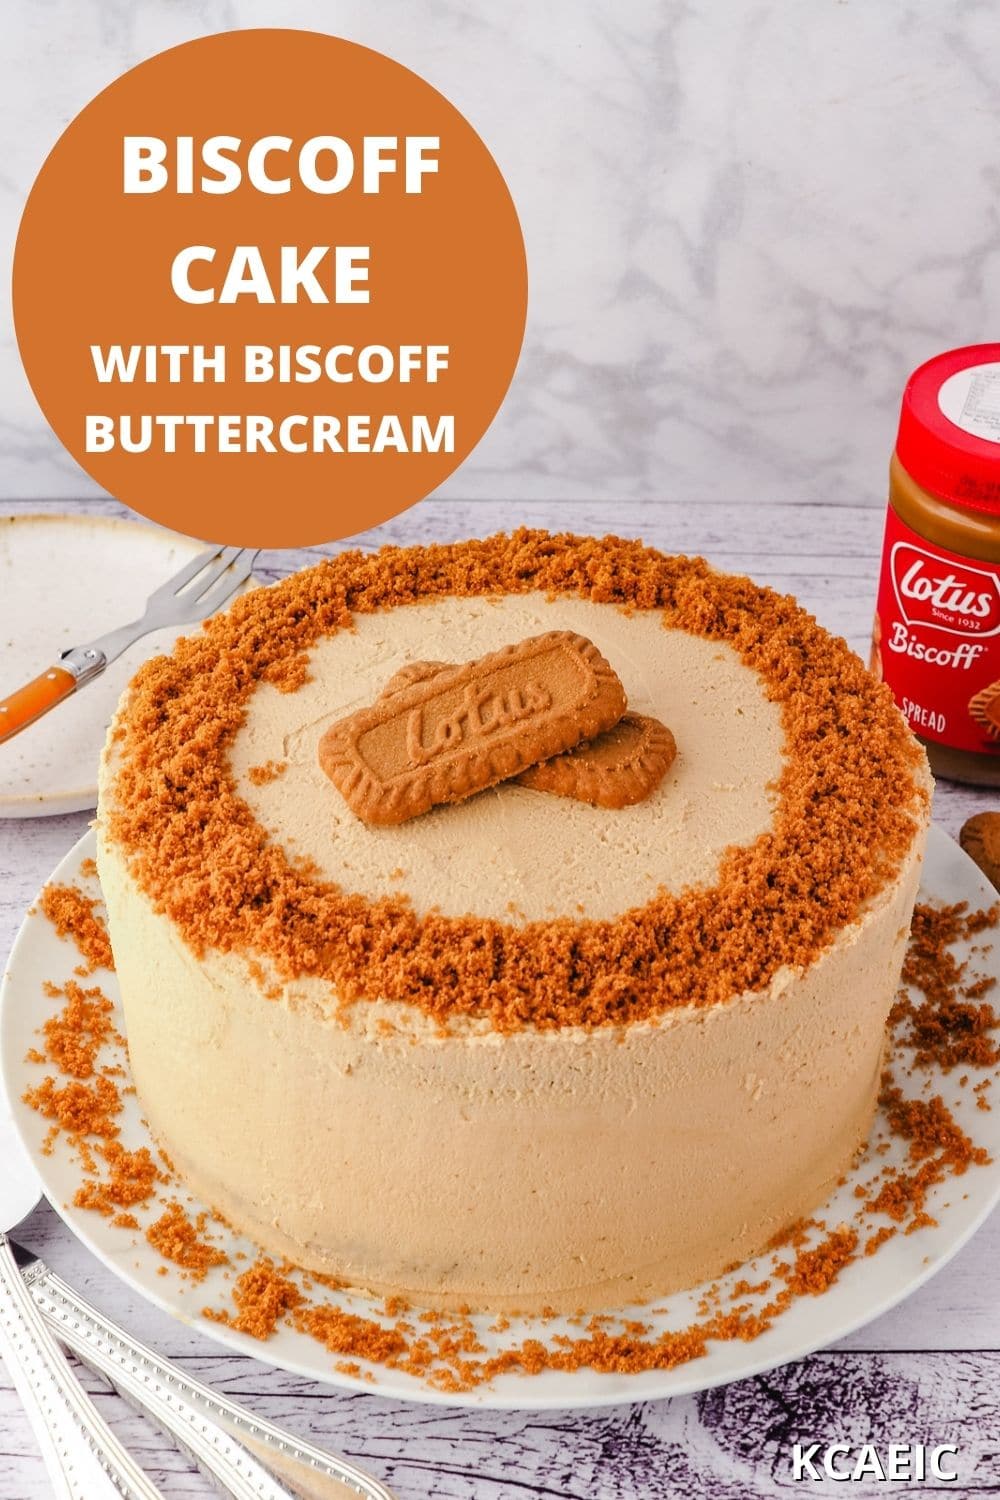 Whole cake on a plate, with serving ware, jar of biscoff spread and serving plate and fork on the side, with text overlay.